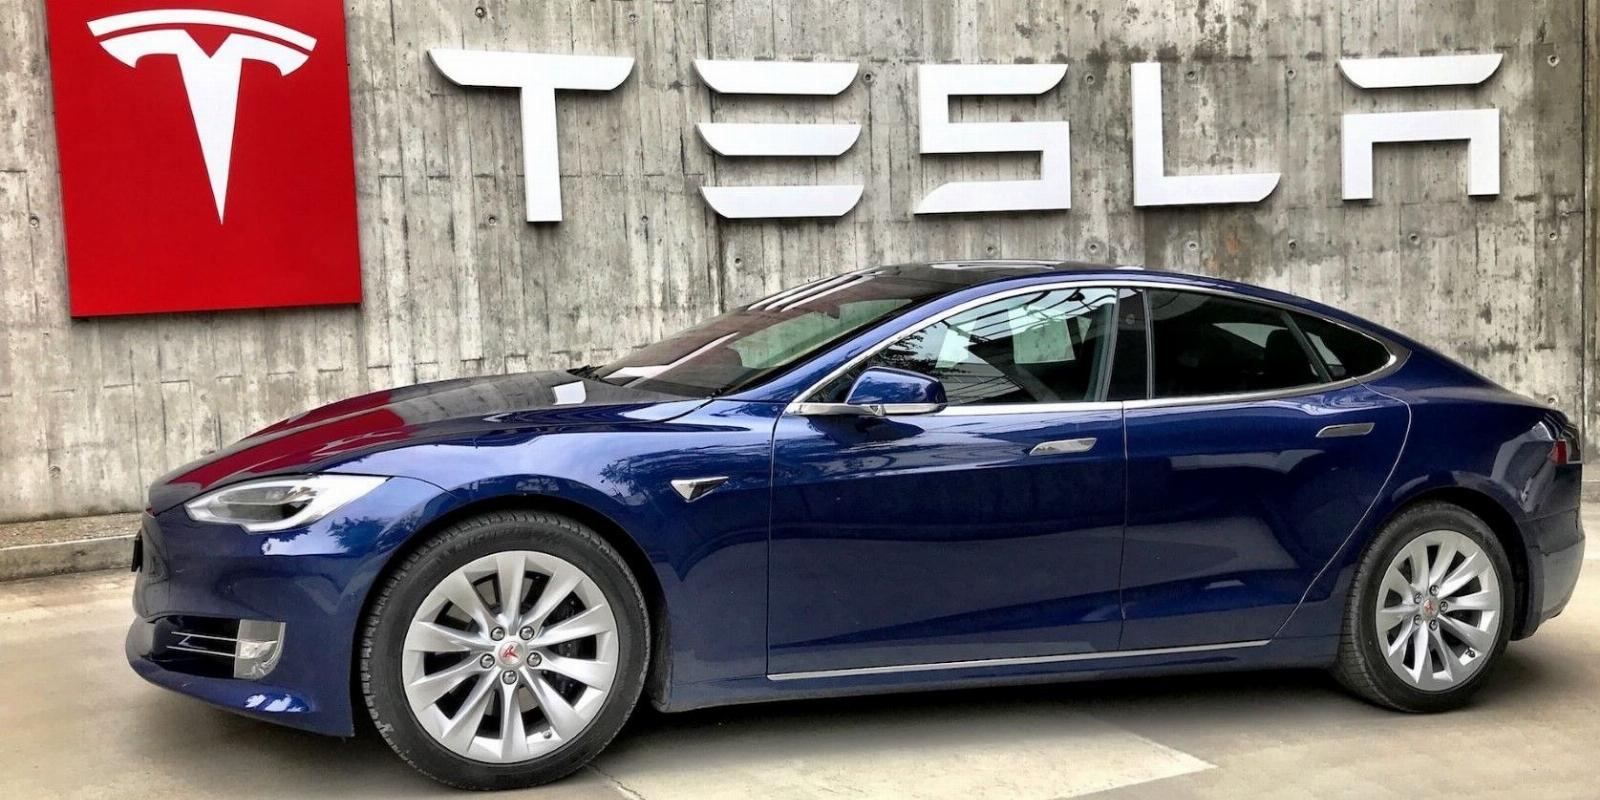 Why Is Tesla Slashing Prices? Is Now the Right Time to Buy a Tesla?